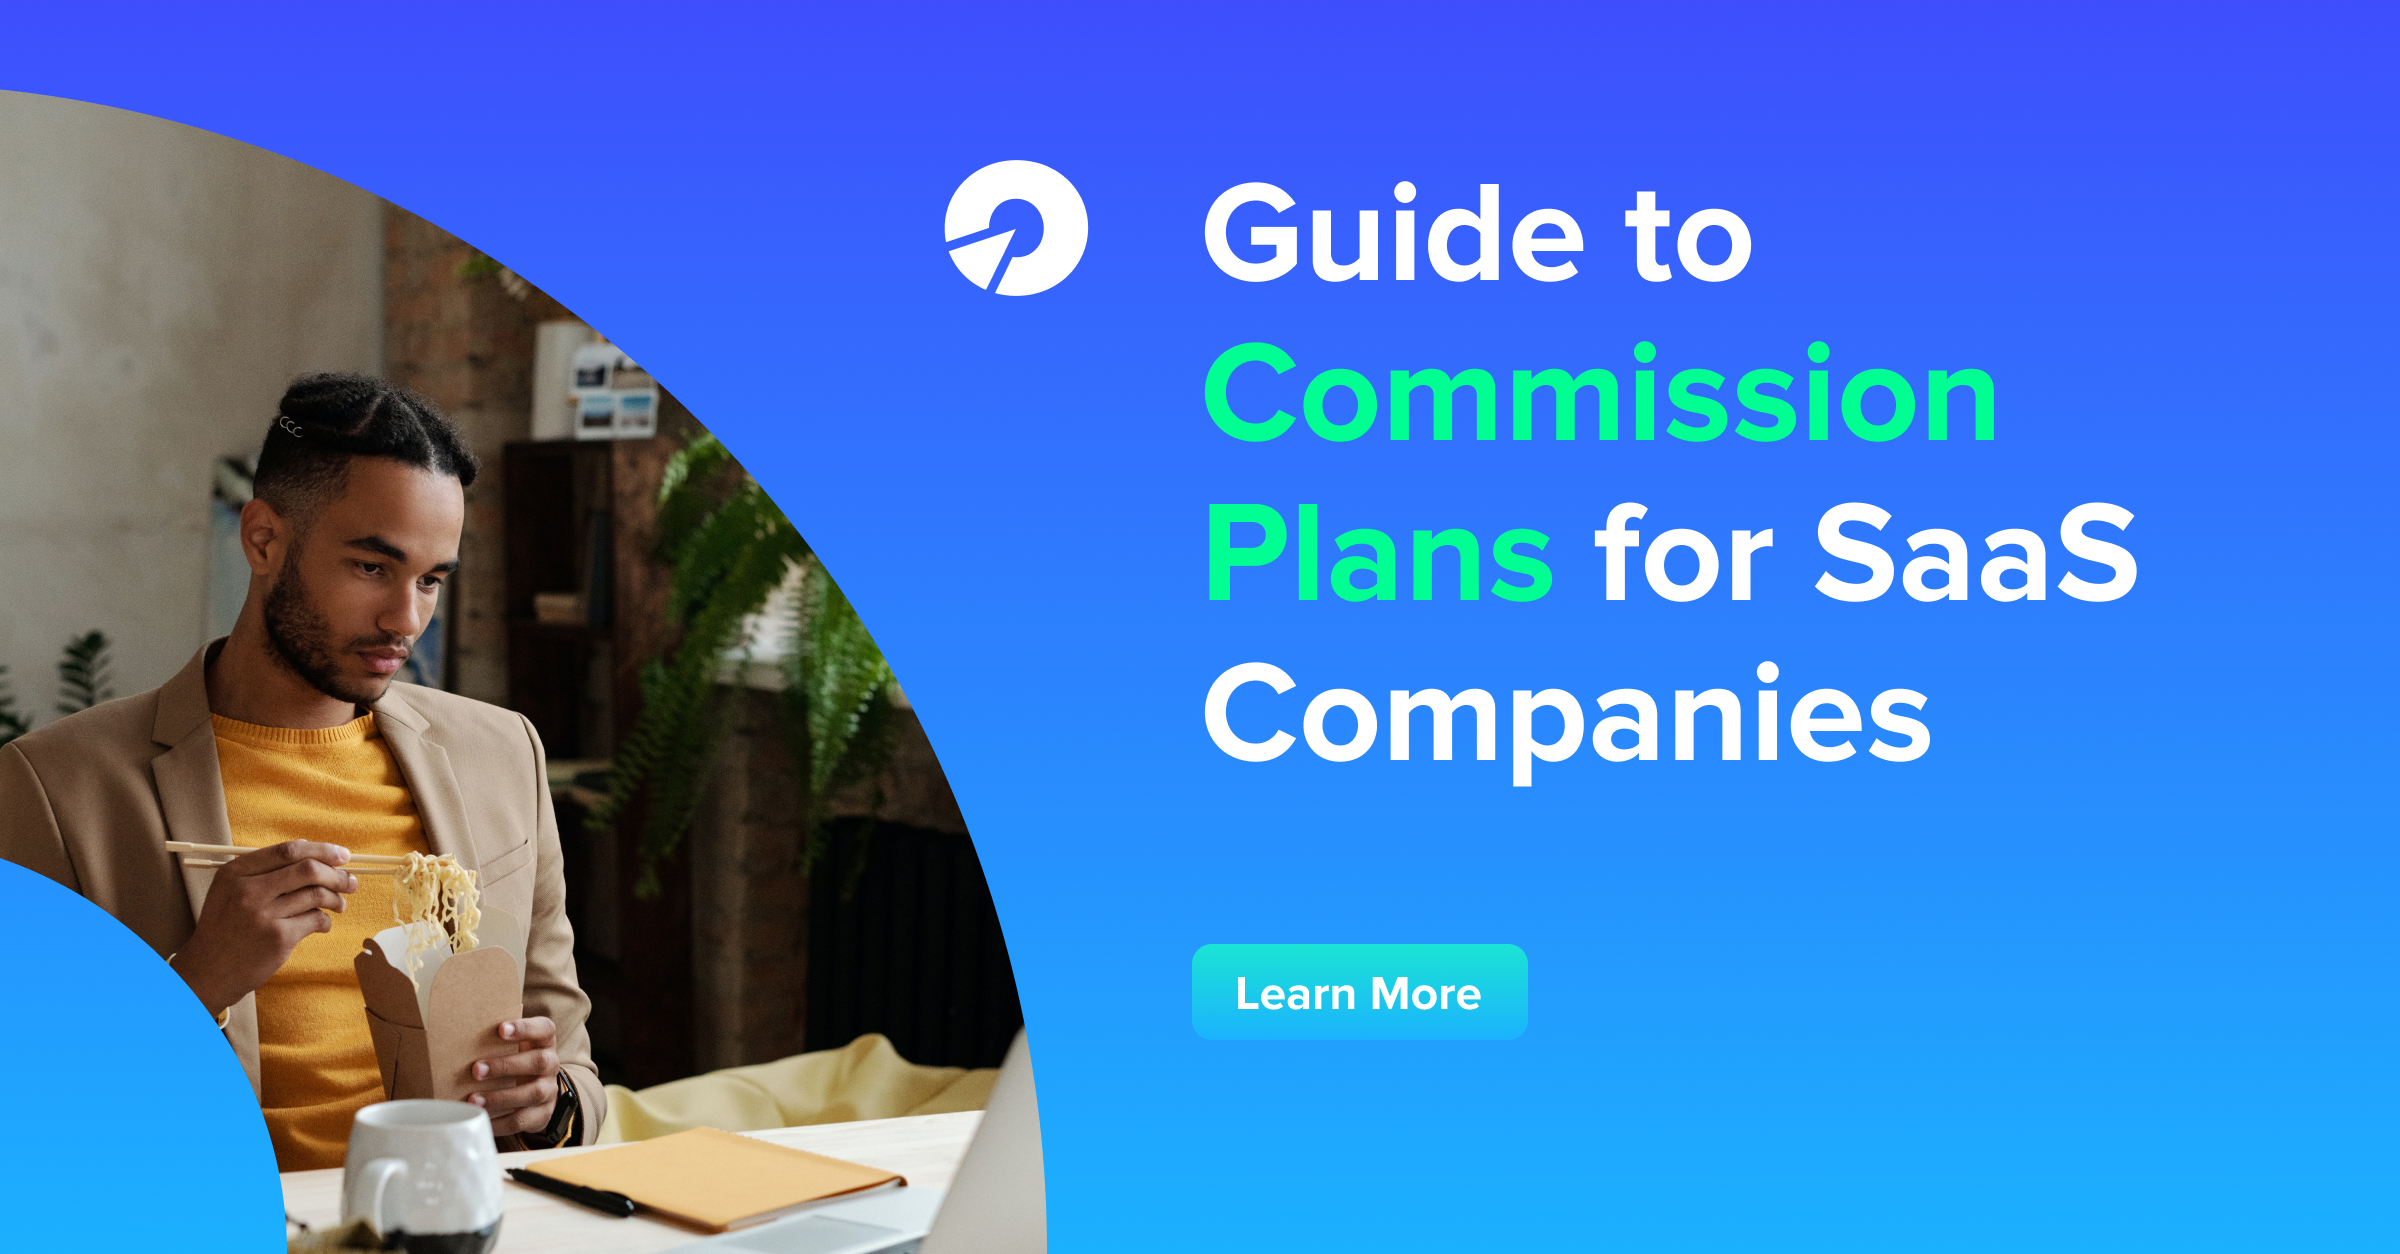 Guide to Commission Plans for SaaS Companies